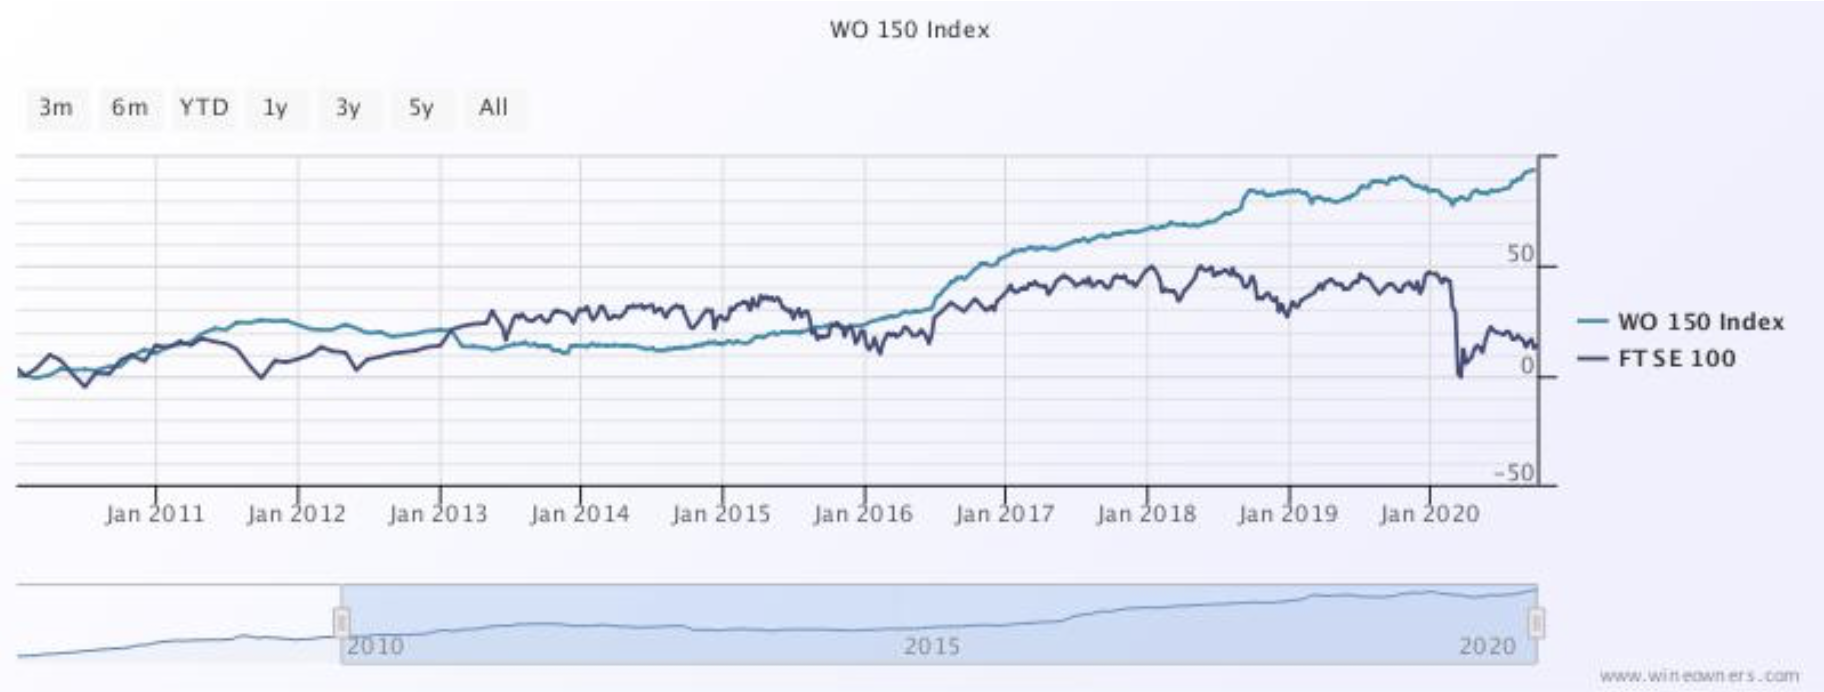 Wine Owners - WO150 Index Vs FTSE 100 - Sept 2020